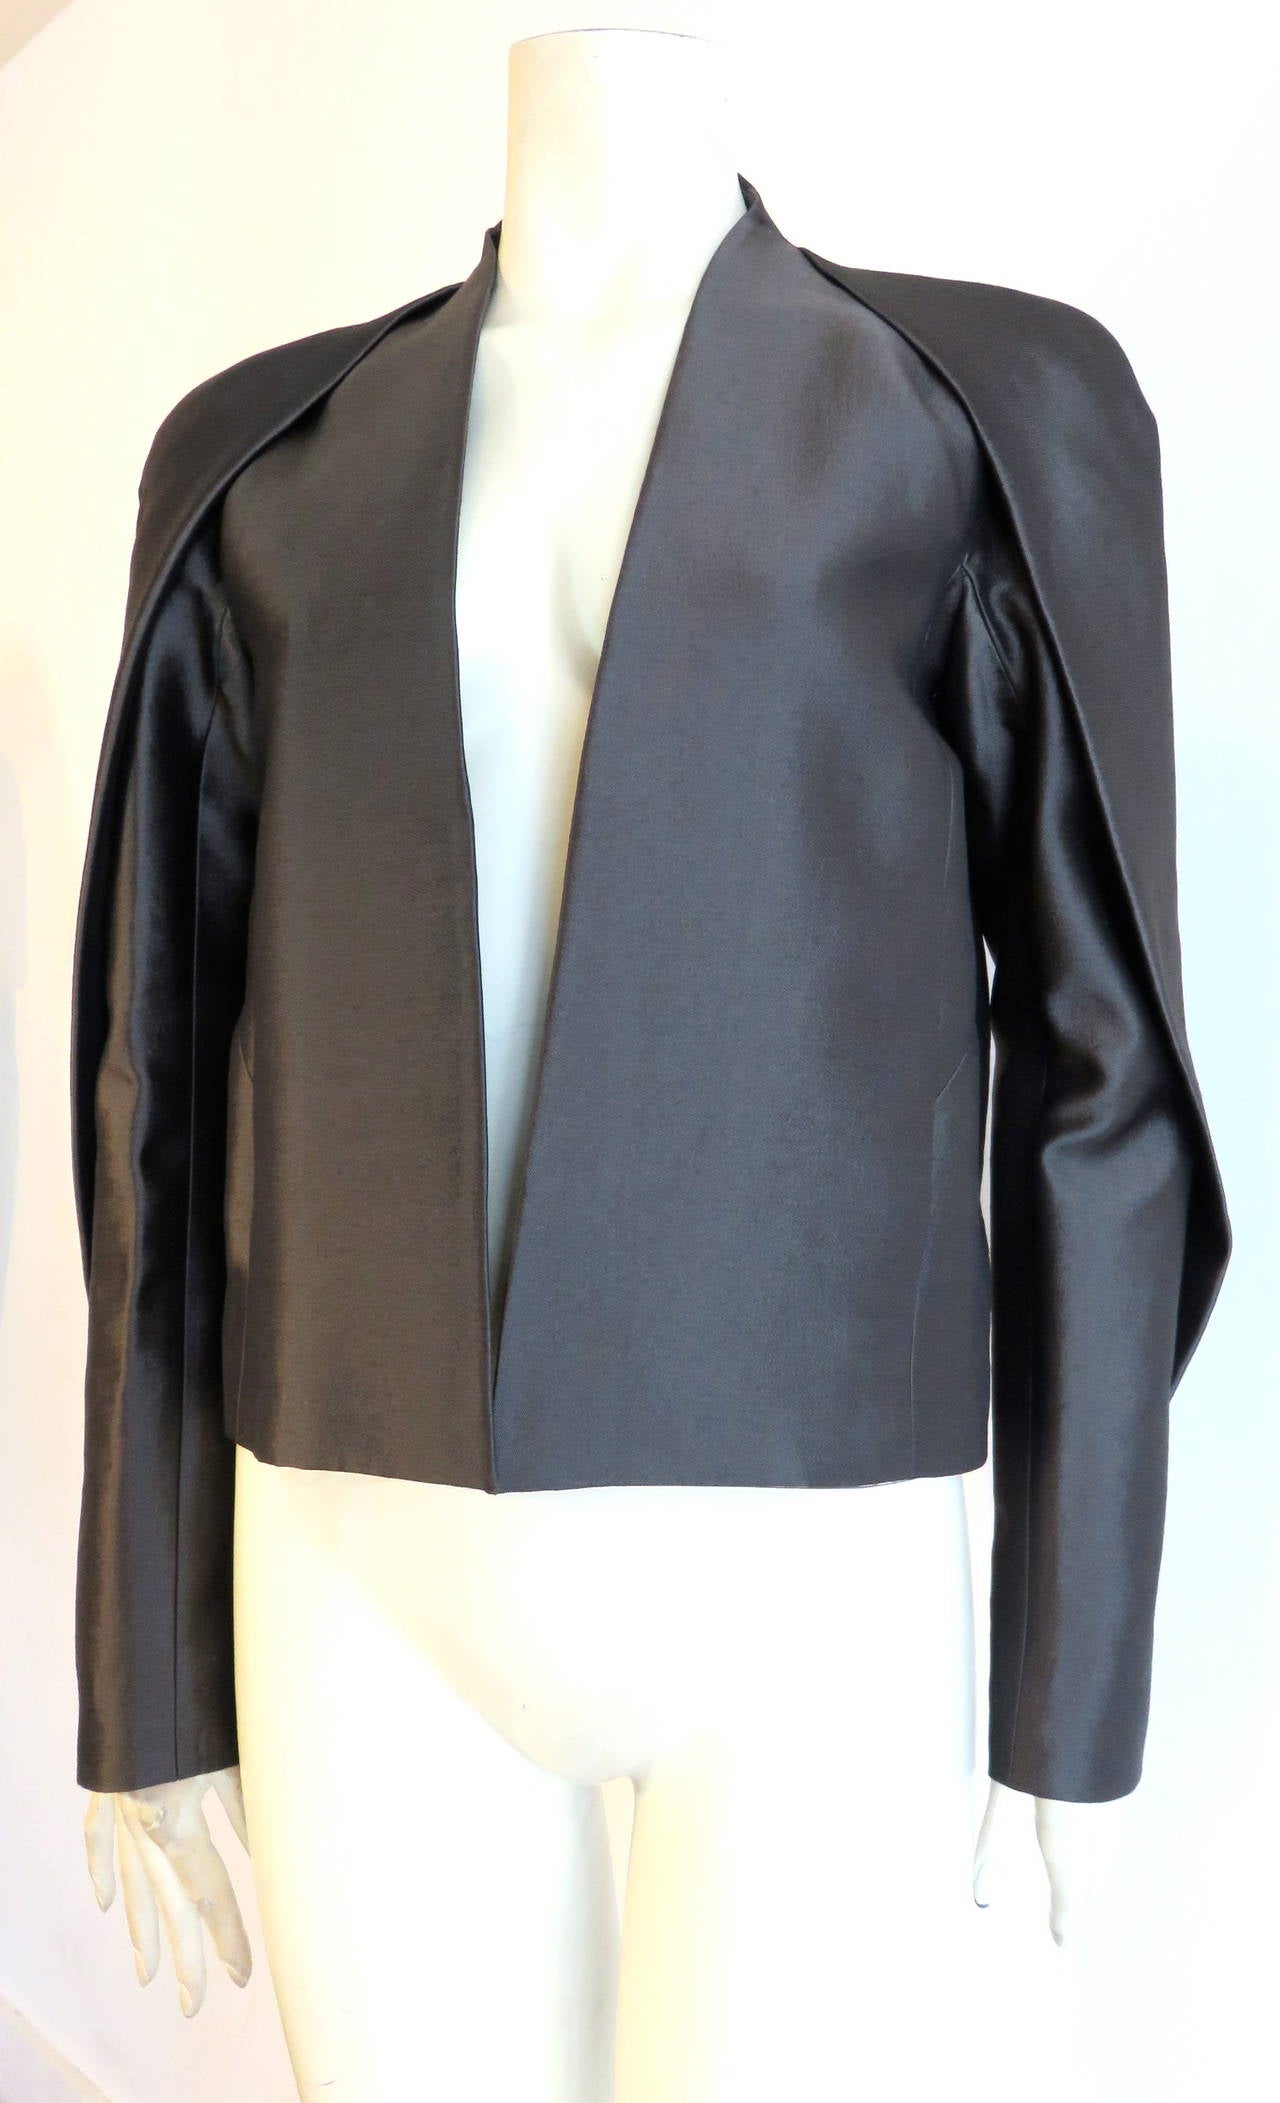 New with tag, HAIDER ACKERMANN Durell Anthracite jacket.

This stunning jacket features a high-shine, tonic, wool & silk, twill weave fabrication.

Gorgeous fold over, origami-style pleat detail at the shoulder cap, and sleeve